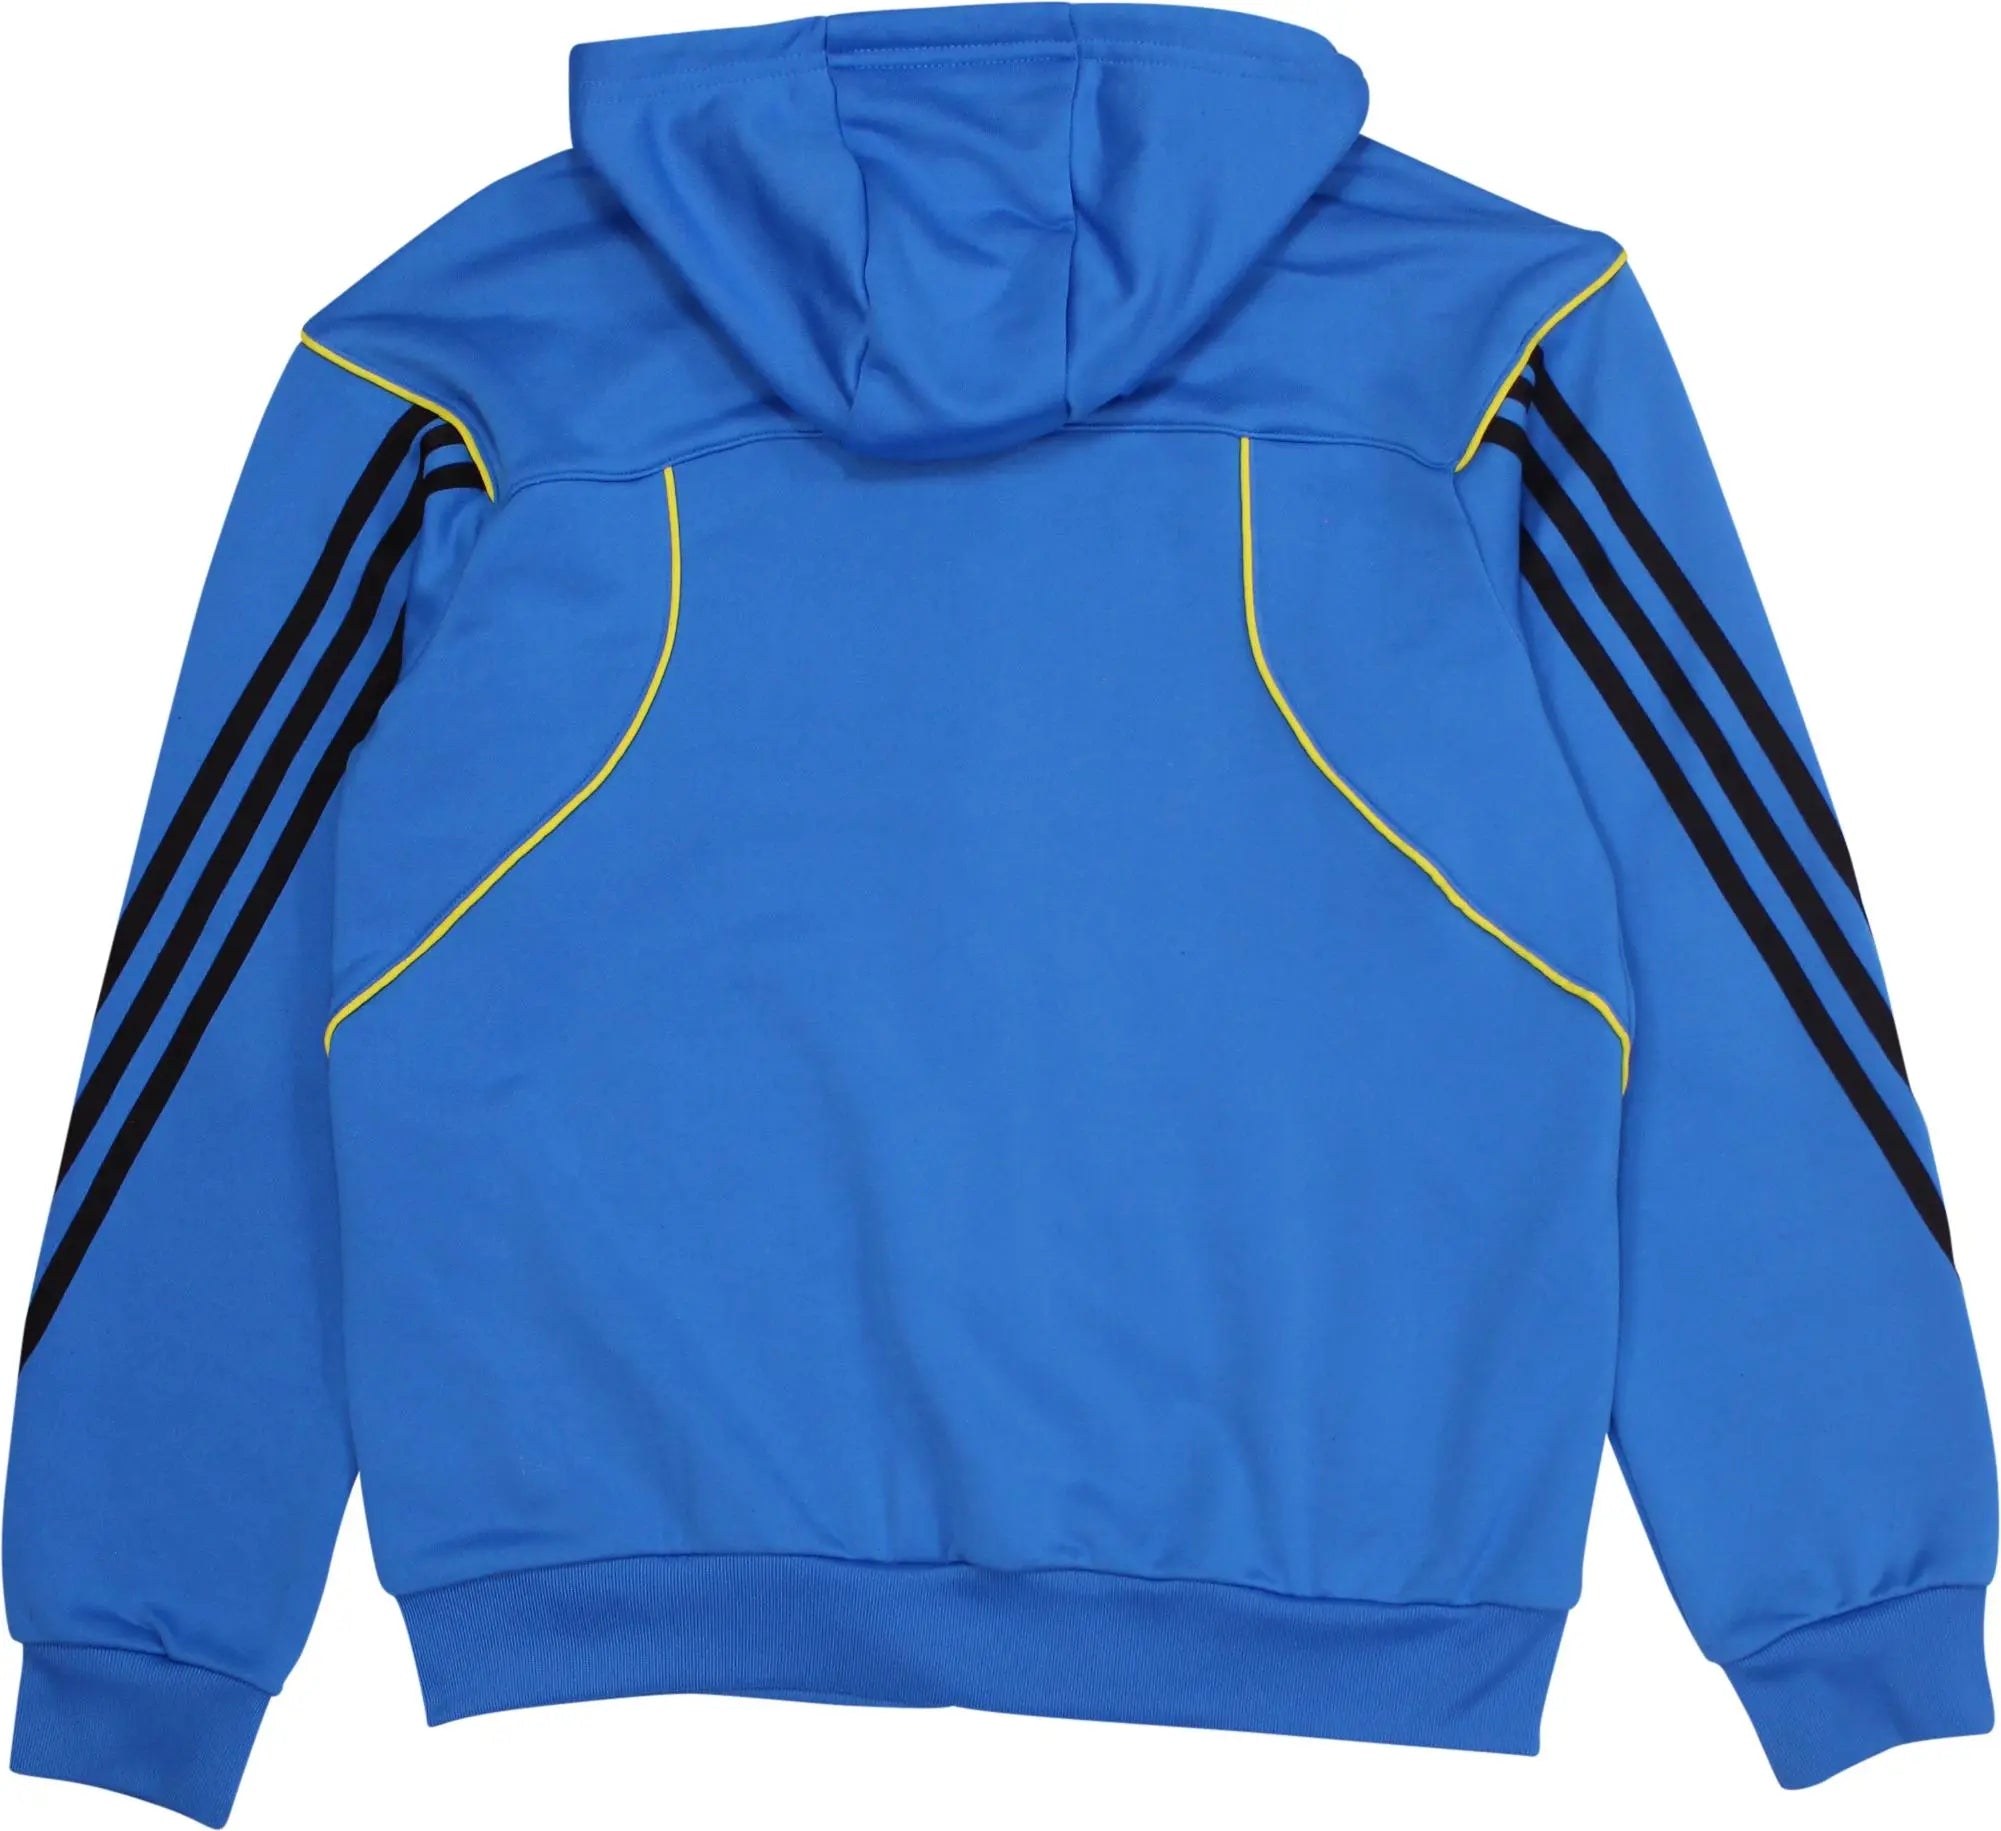 Adidas - Blue Hoodie with Zipper by Adidas- ThriftTale.com - Vintage and second handclothing